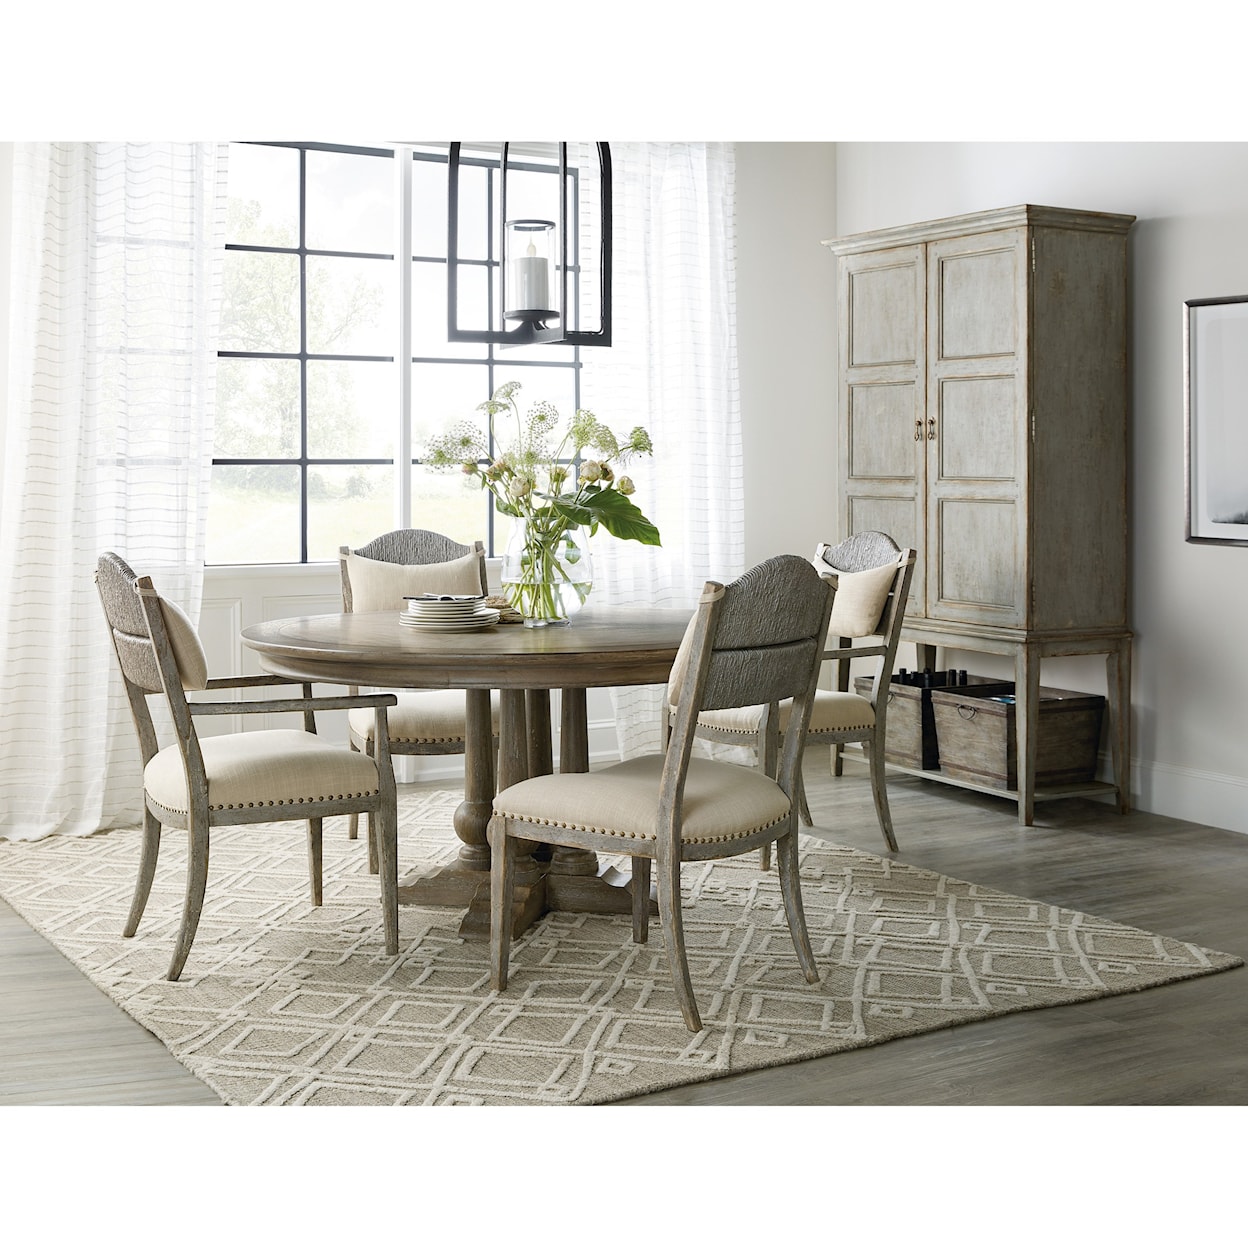 Hooker Furniture Alfresco Casual Dining Room Group